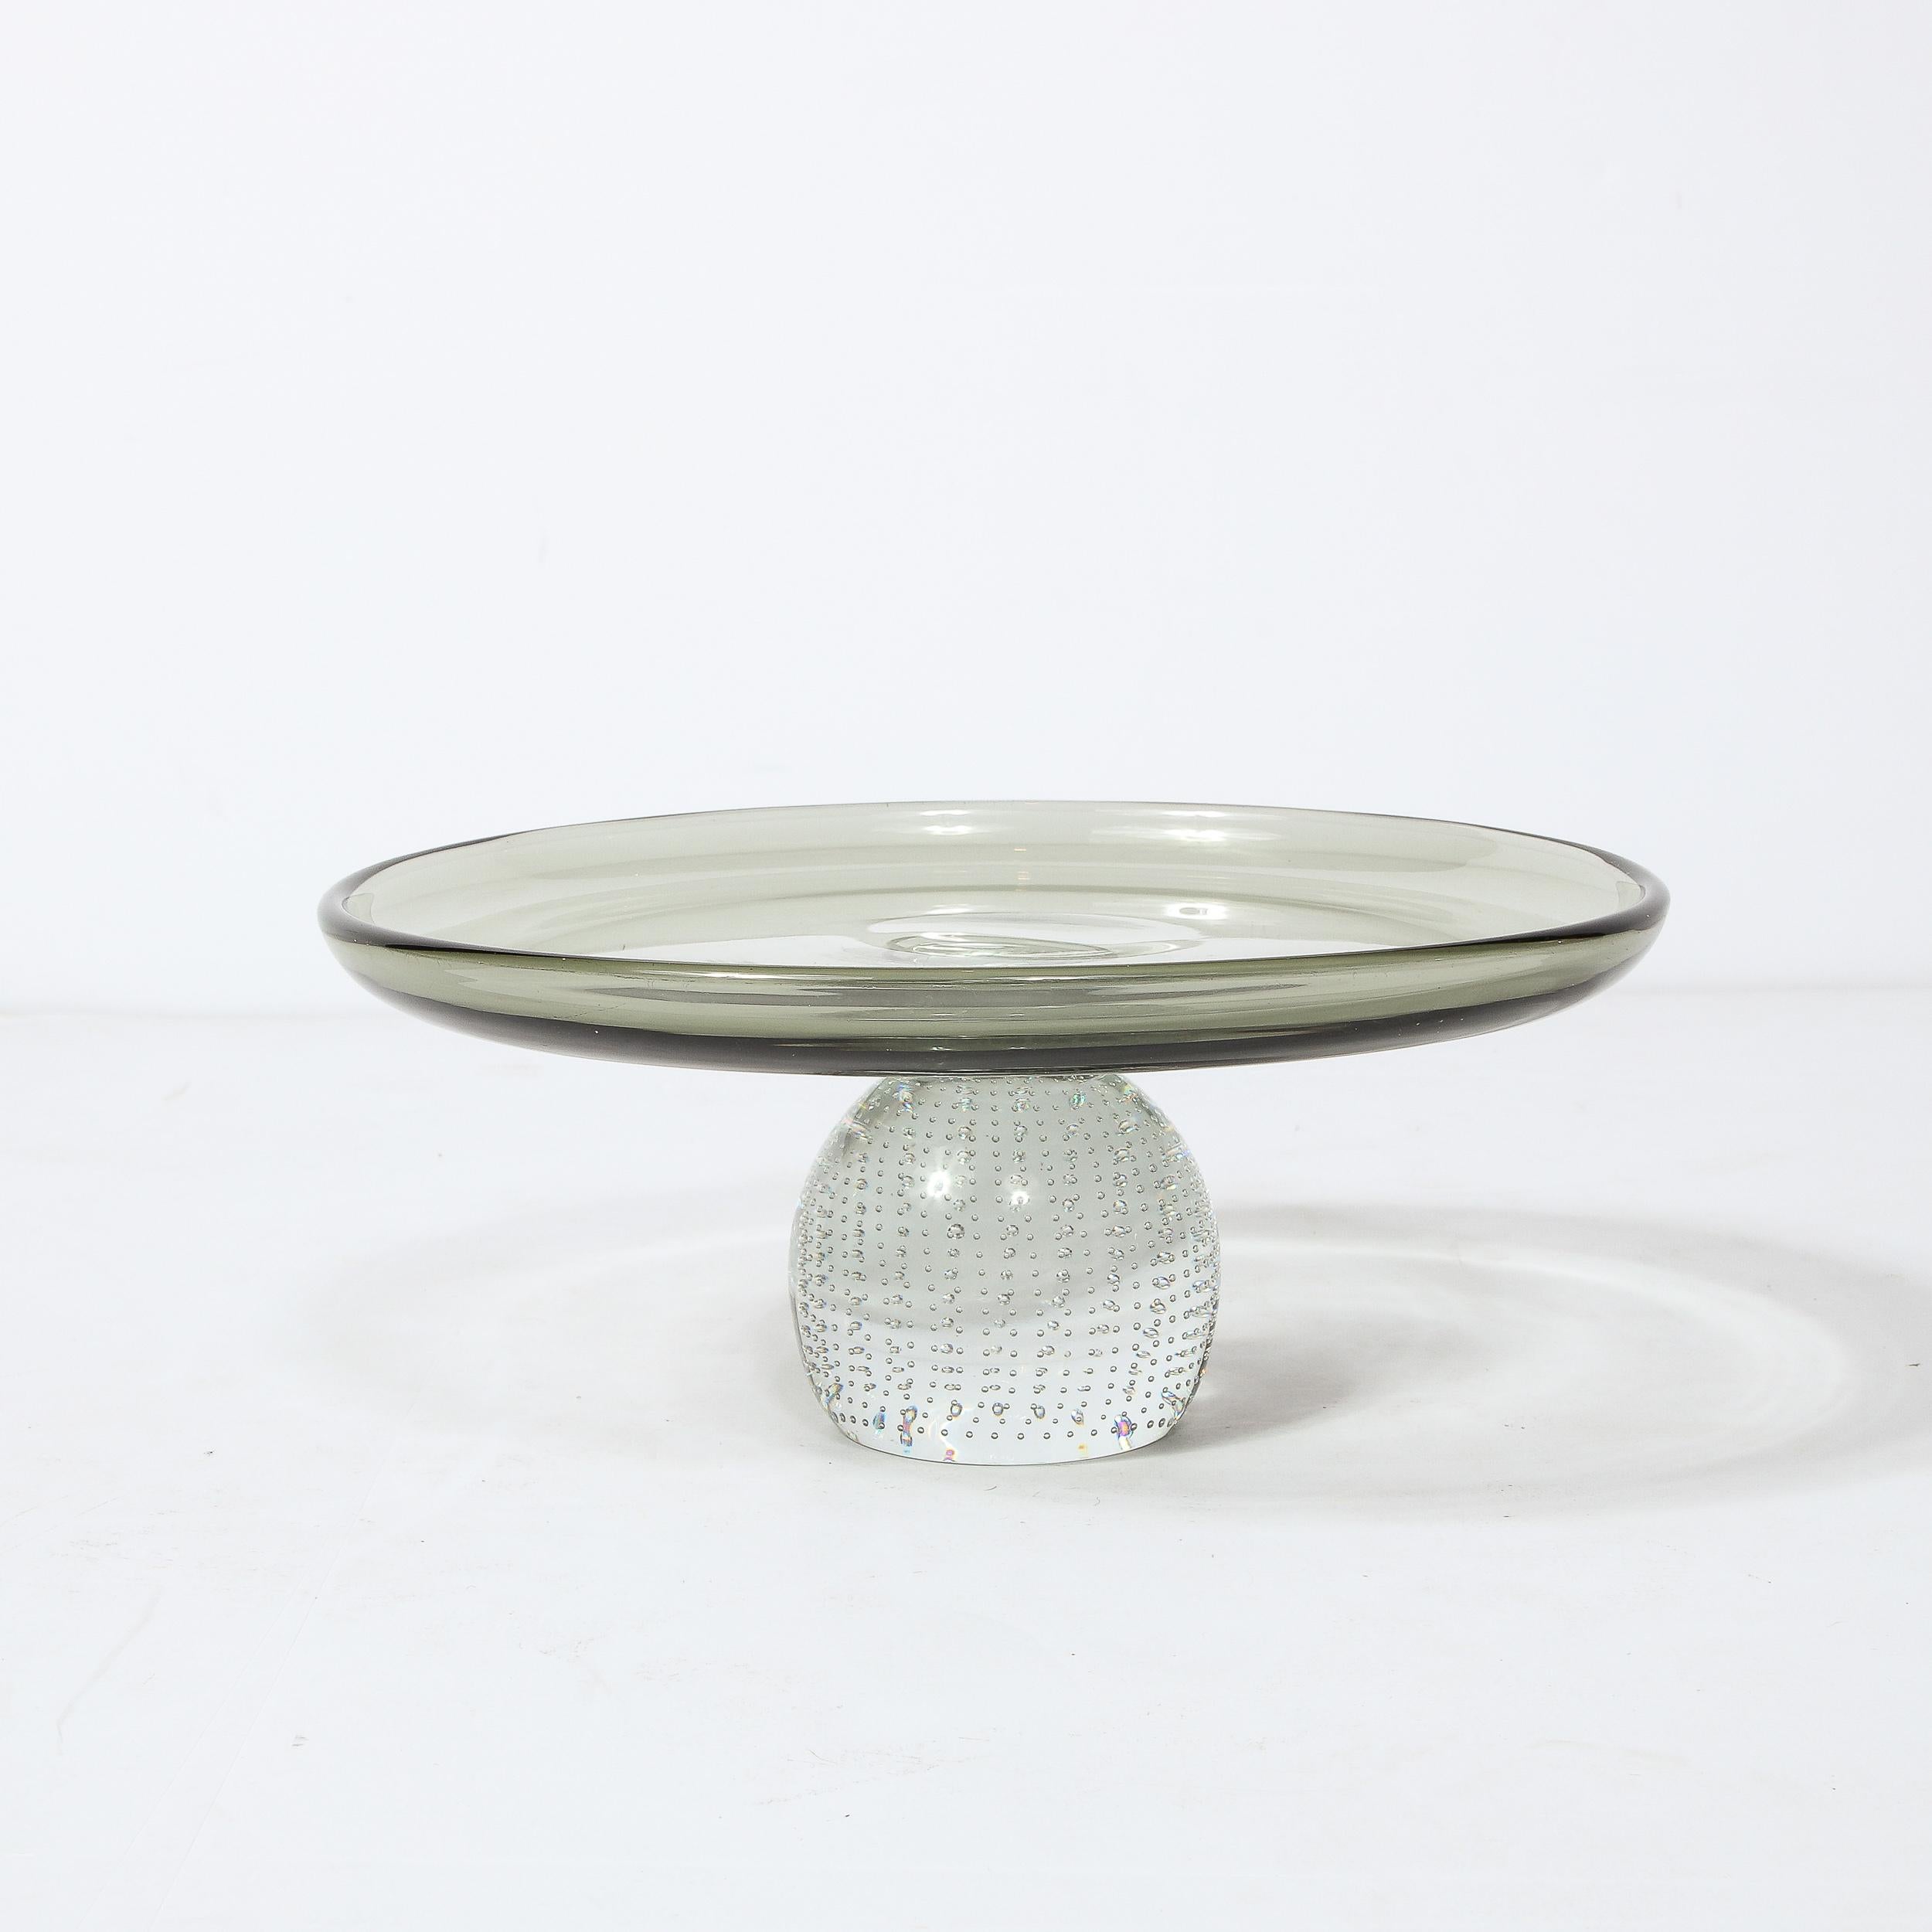 American Mid-Century Modernist Glass Centerpiece w/ Precise Murine Detailing by Pairpoint For Sale